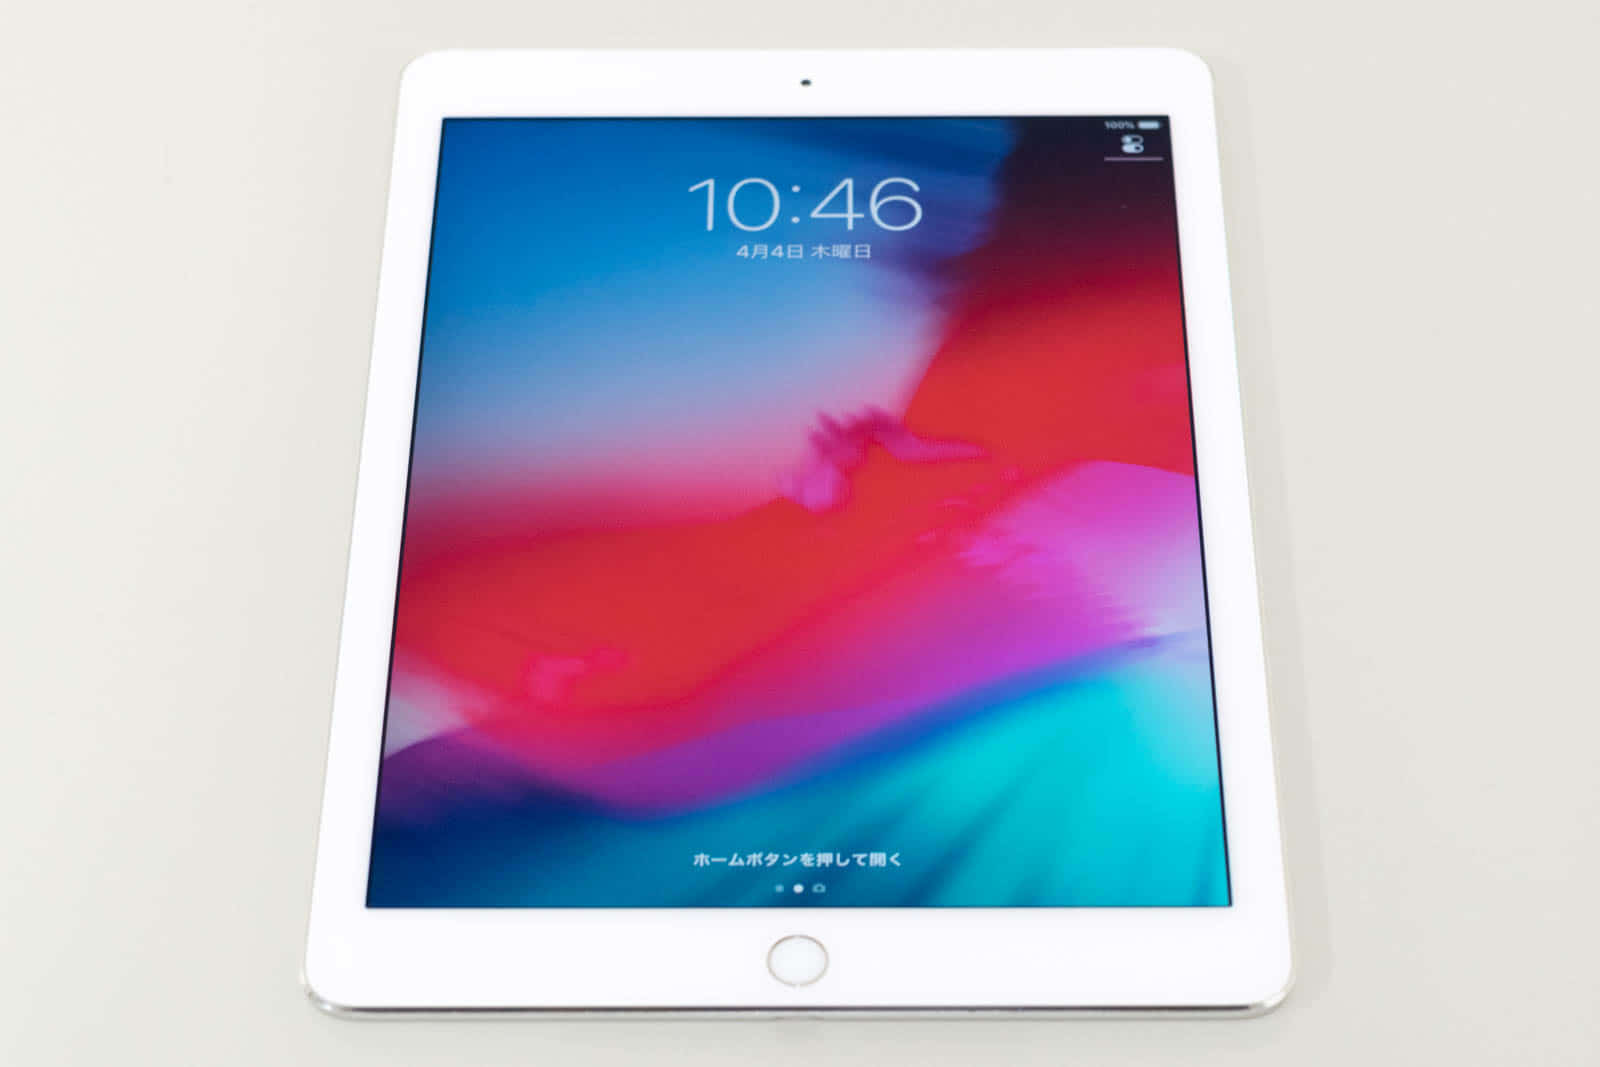 Used]APPLE MGKM2J/A iPad Air 2 Wi-Fi 64GB silver Touch ID - BE